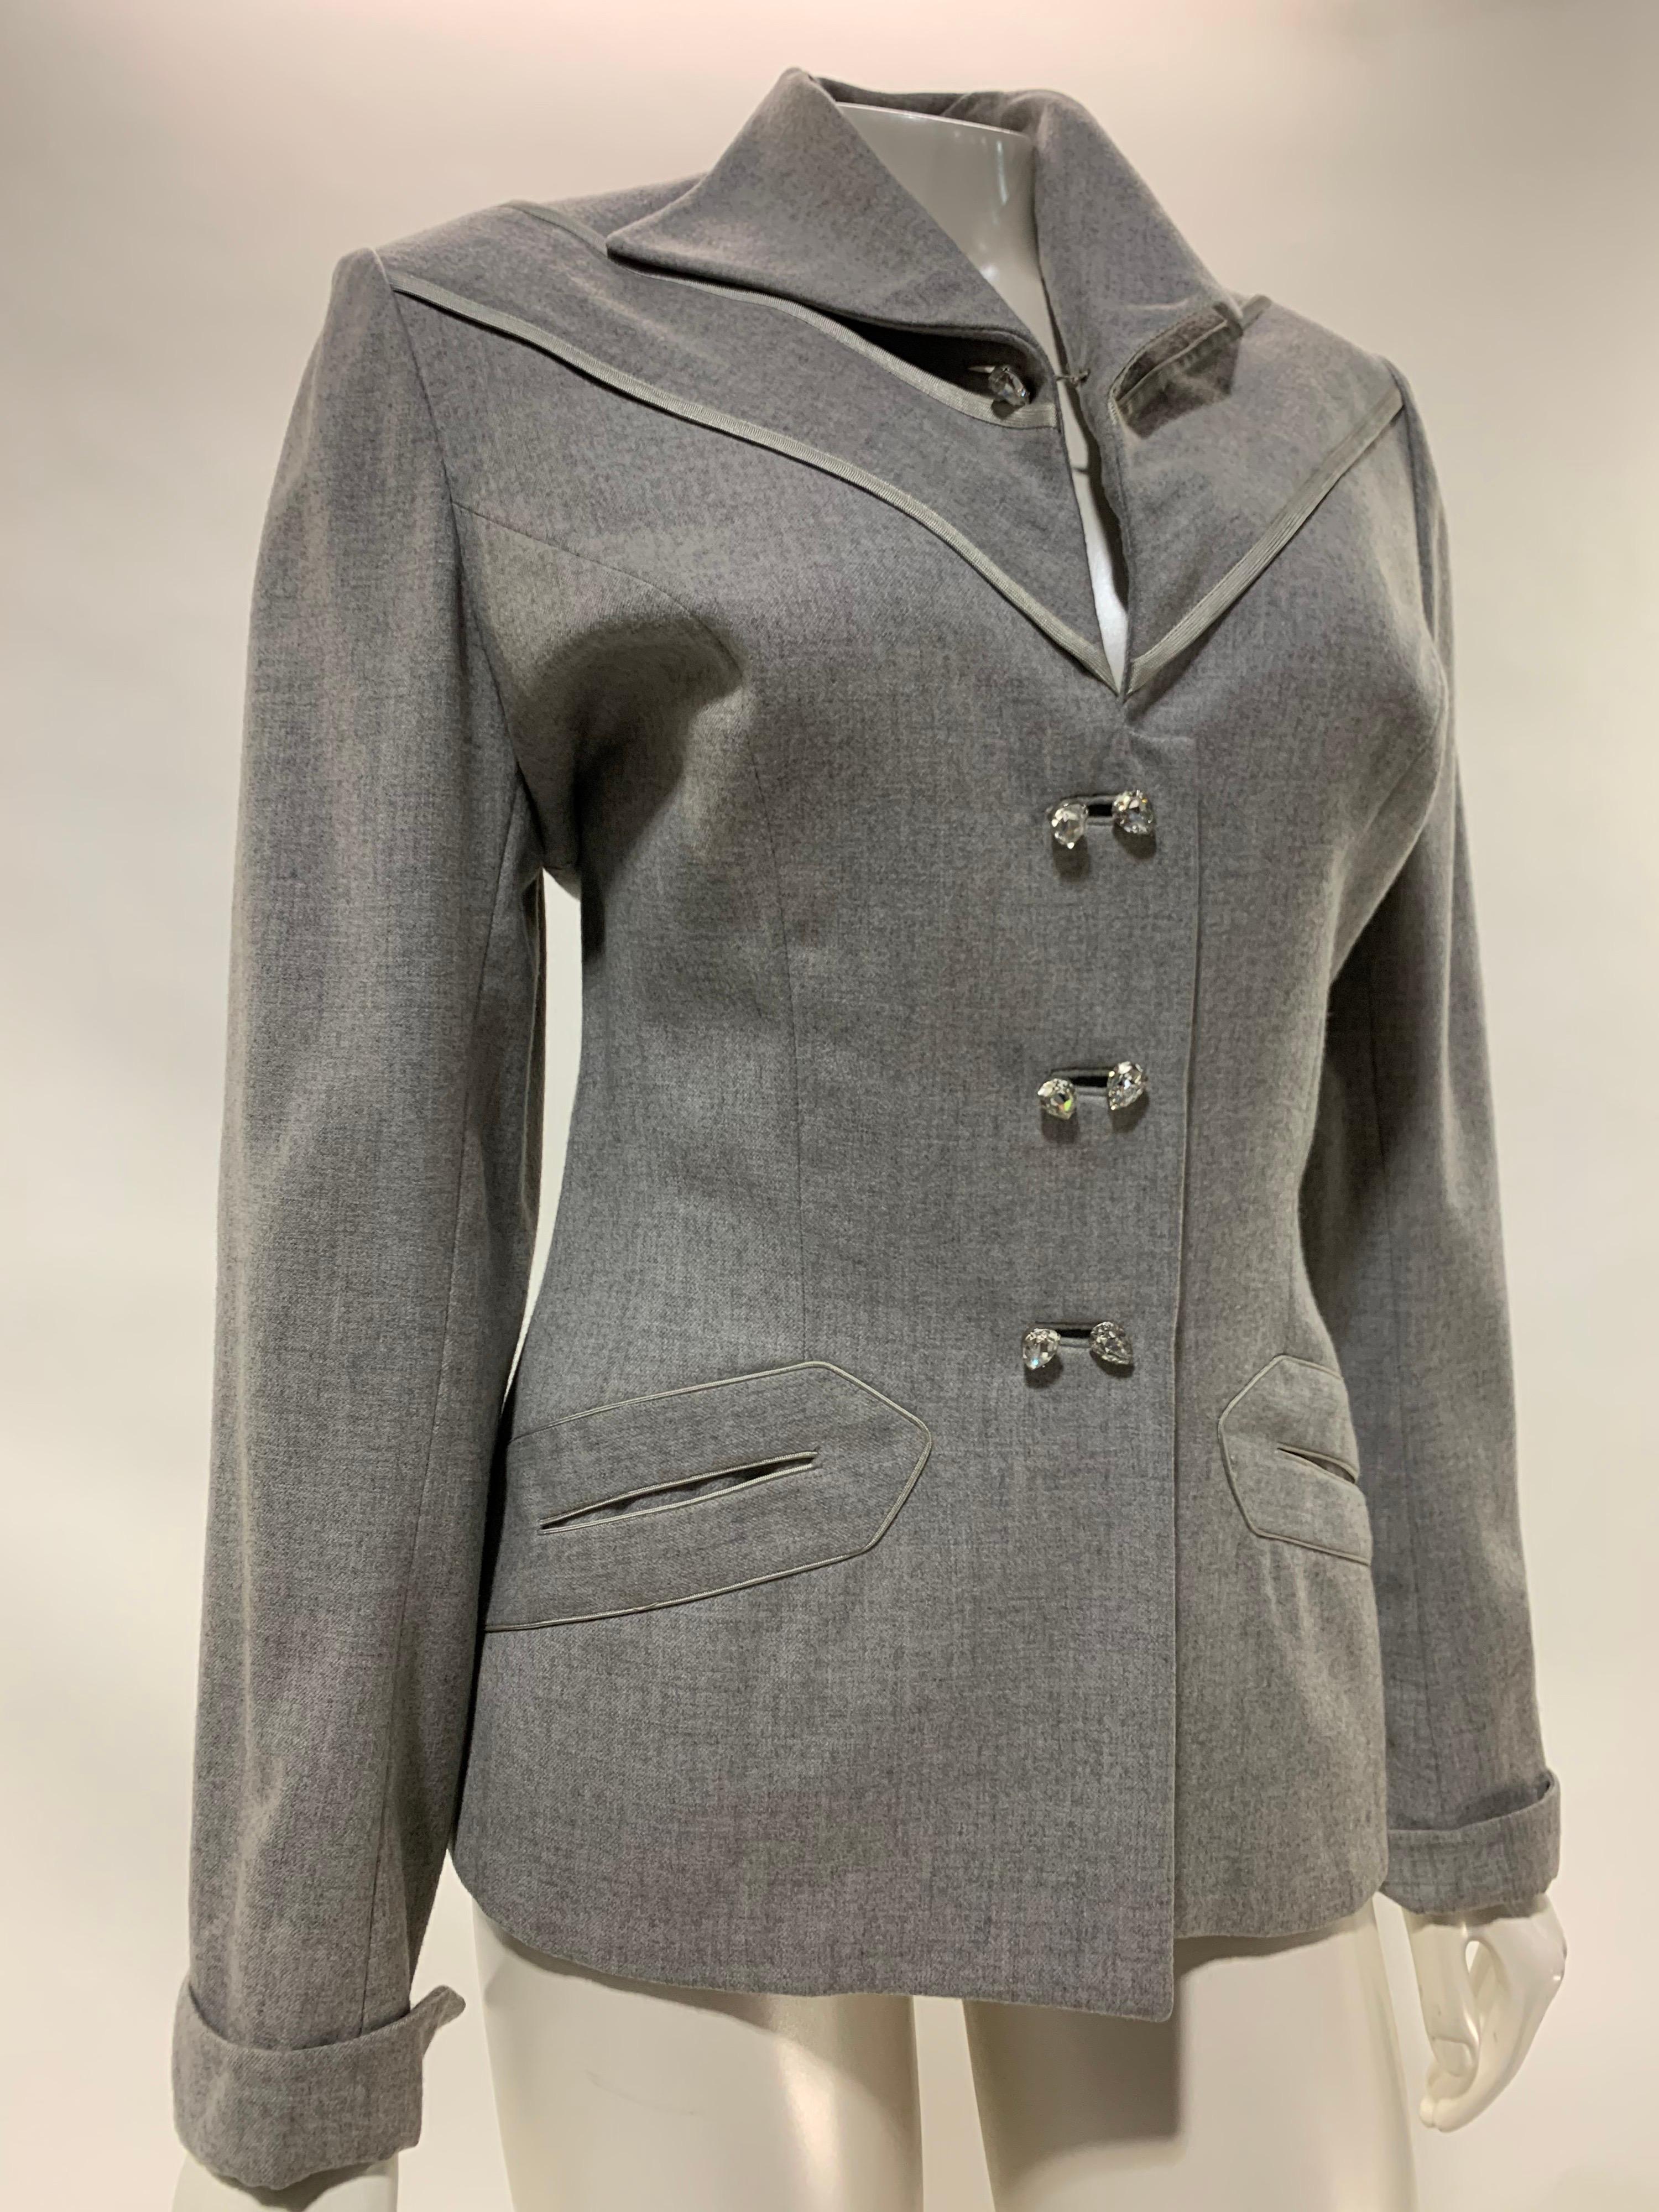 A lovely 1950s Lilli Ann heathered gray wool gabardine jacket with satin angled piping trim in front and doubled teardrop rhinestone buttons (two buttons are used for each button hole.) Front slash pockets, cuffed sleeves. Lined in mauve crepe. Set